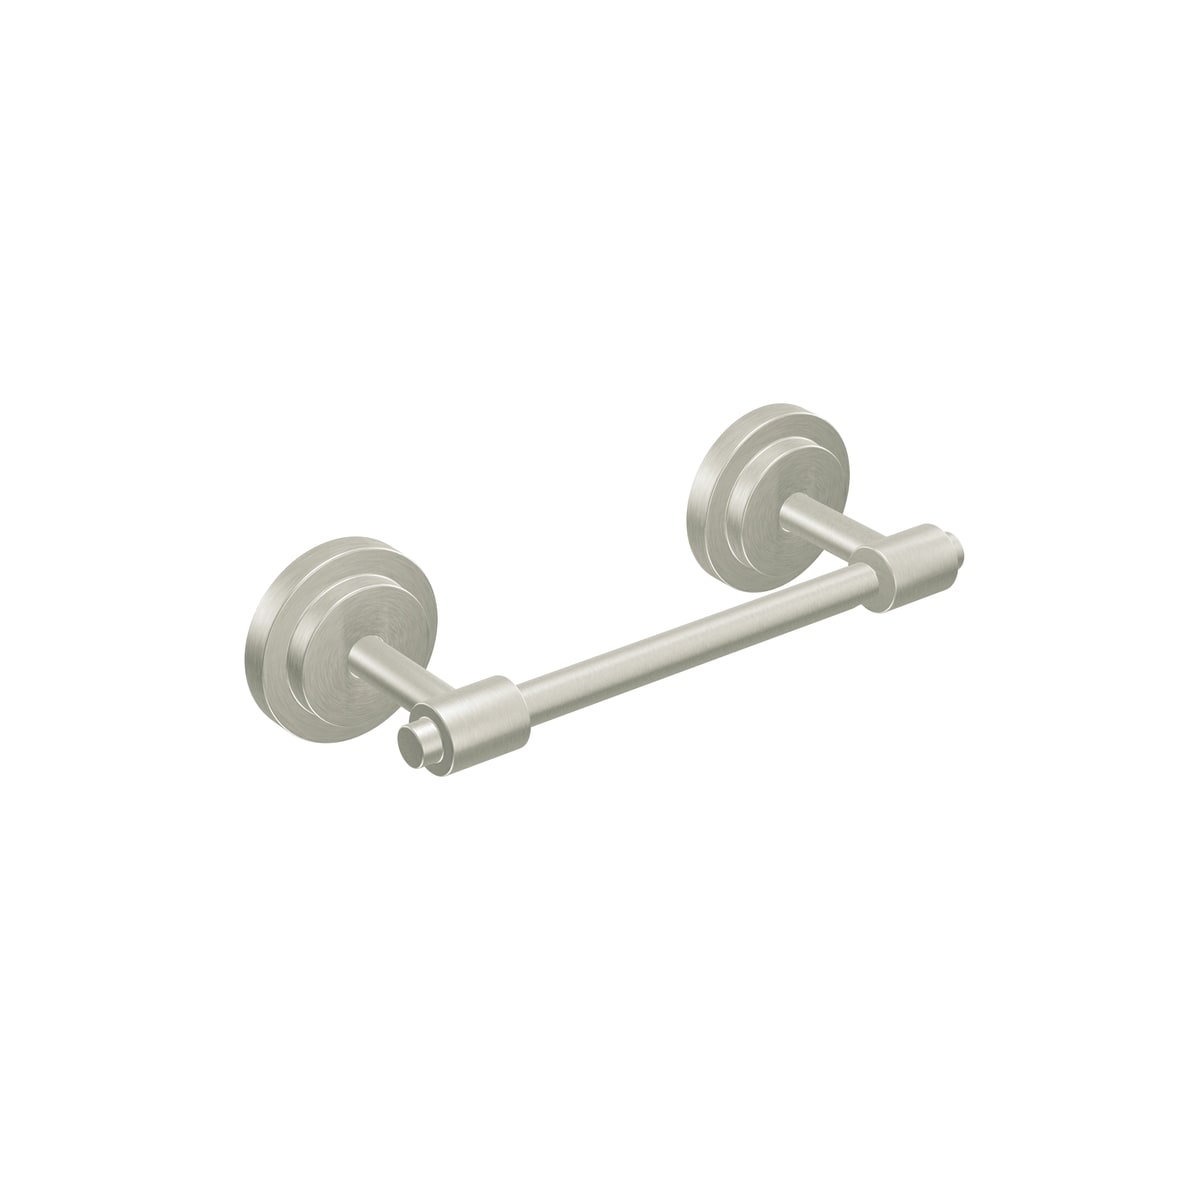 BWE Traditional Double Post Spring Wall Mounted Towel Bar Toilet Paper Holder in Oil Rubbed Bronze